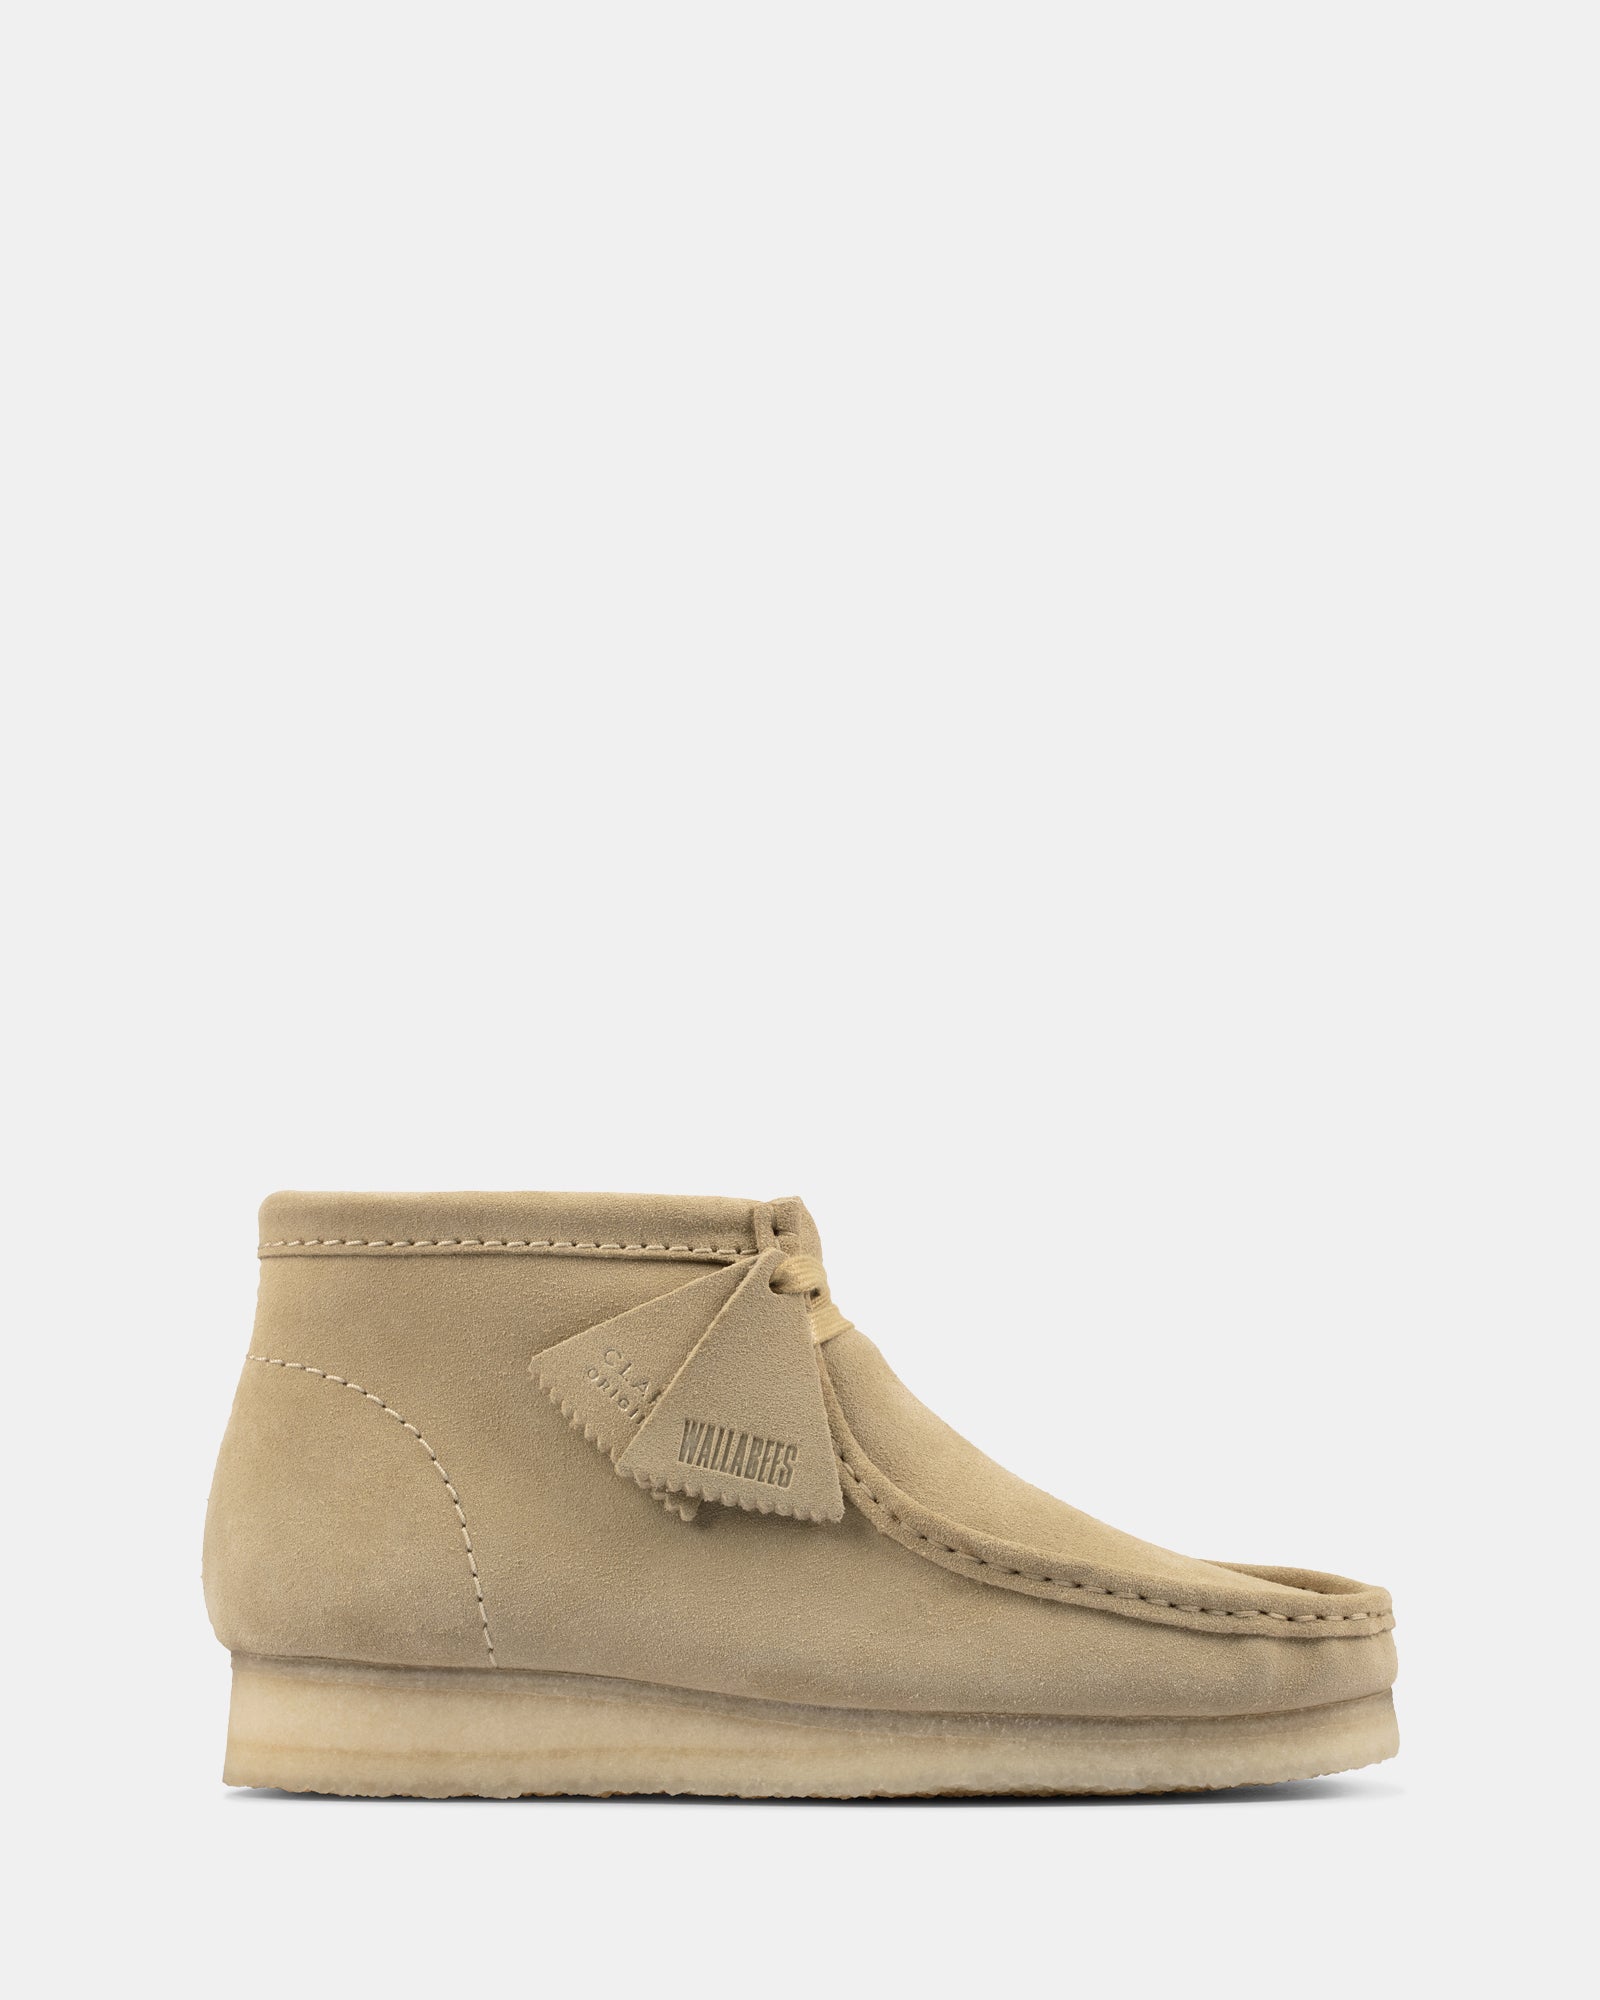 Wallabee Boot (M) Maple Suede – Clarks